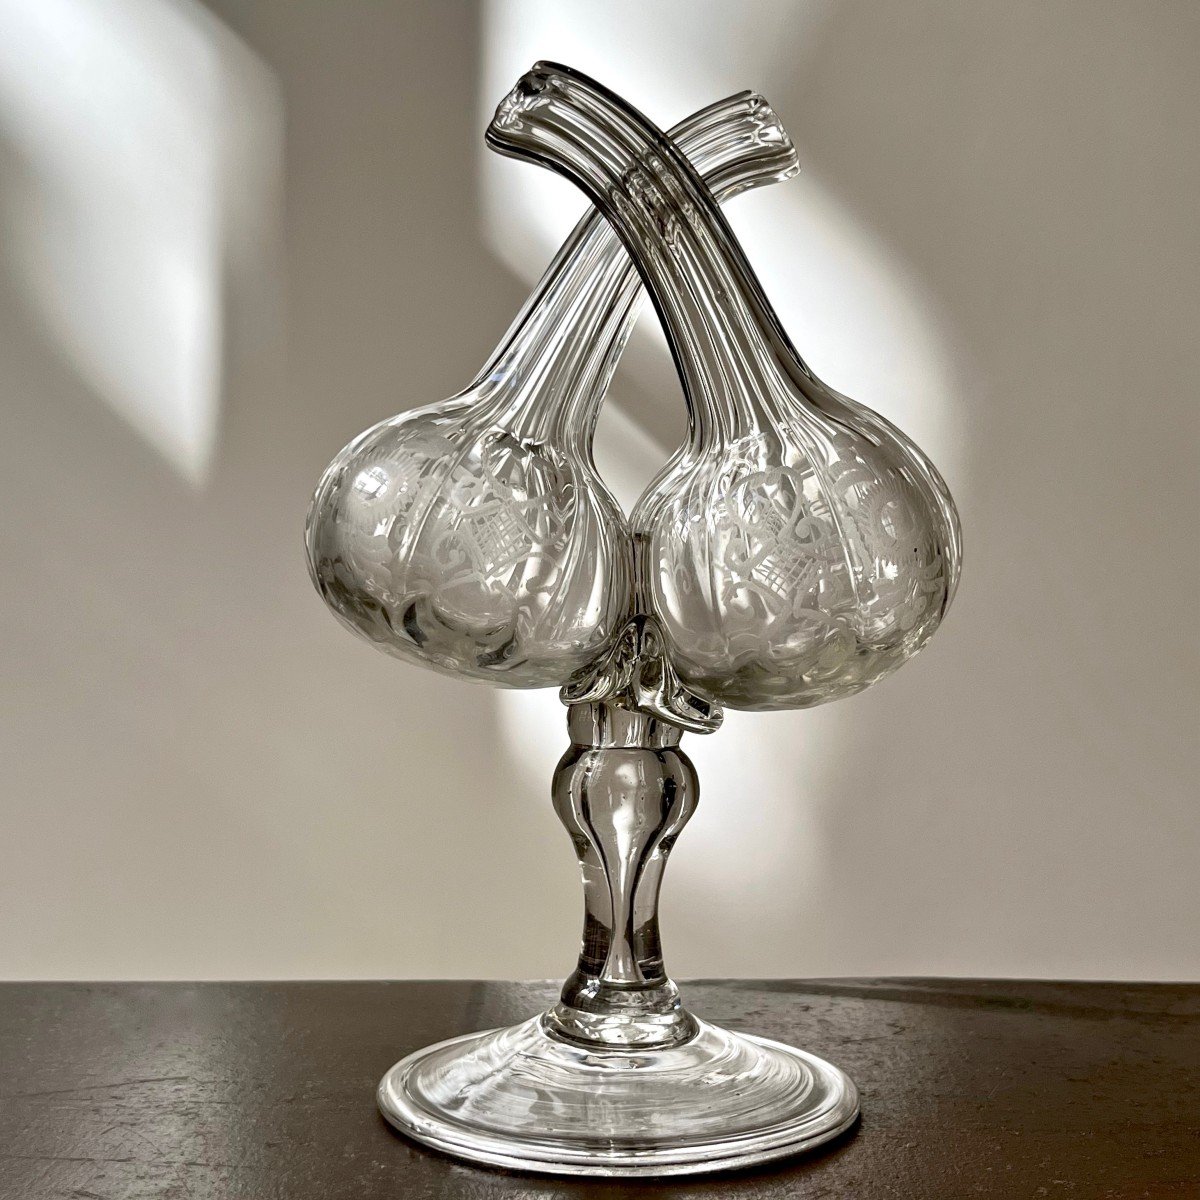 Guédoufle 18th Century Oil Cruet Vinegar Pot In Blown Glass With Godrons And Engraved Decor 18th